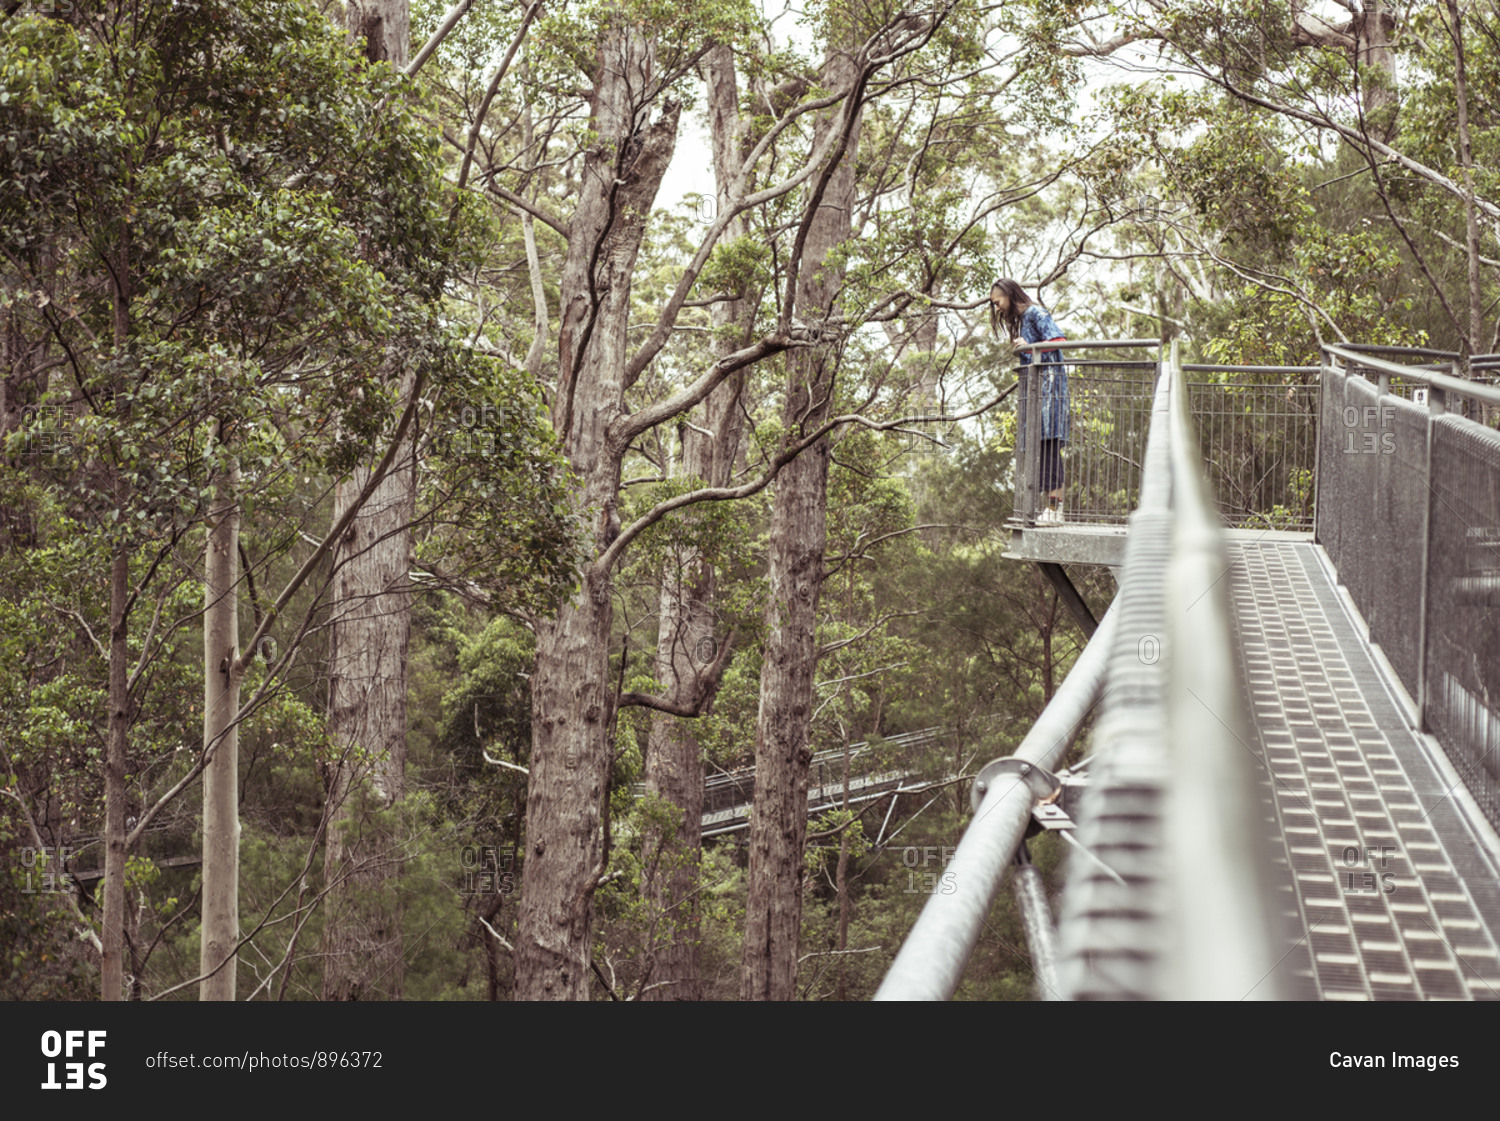 Androgynous figure looks down from great heights on tree top walk